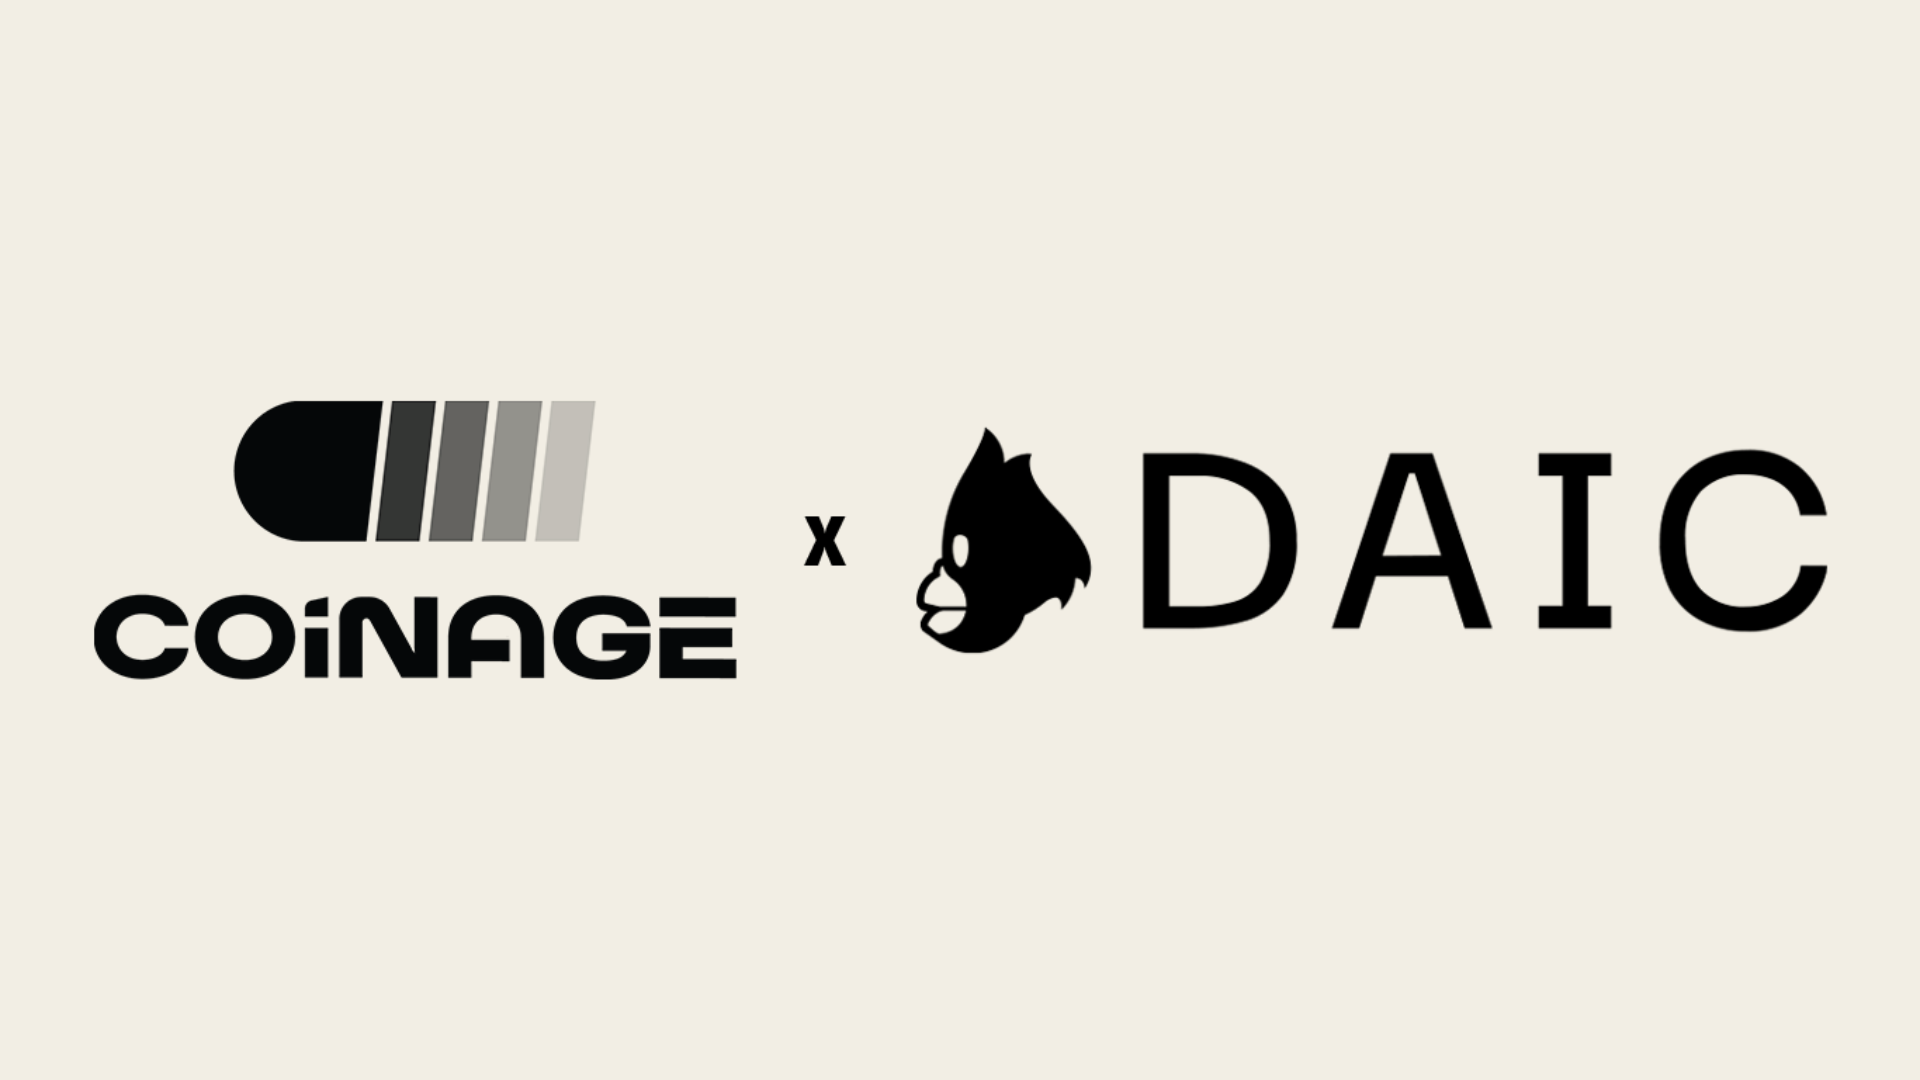 Coinage is partnering with Austrian validator company DAIC to power the first validator set with community at its core. The partnership will help Coinage sustainably decentralize.